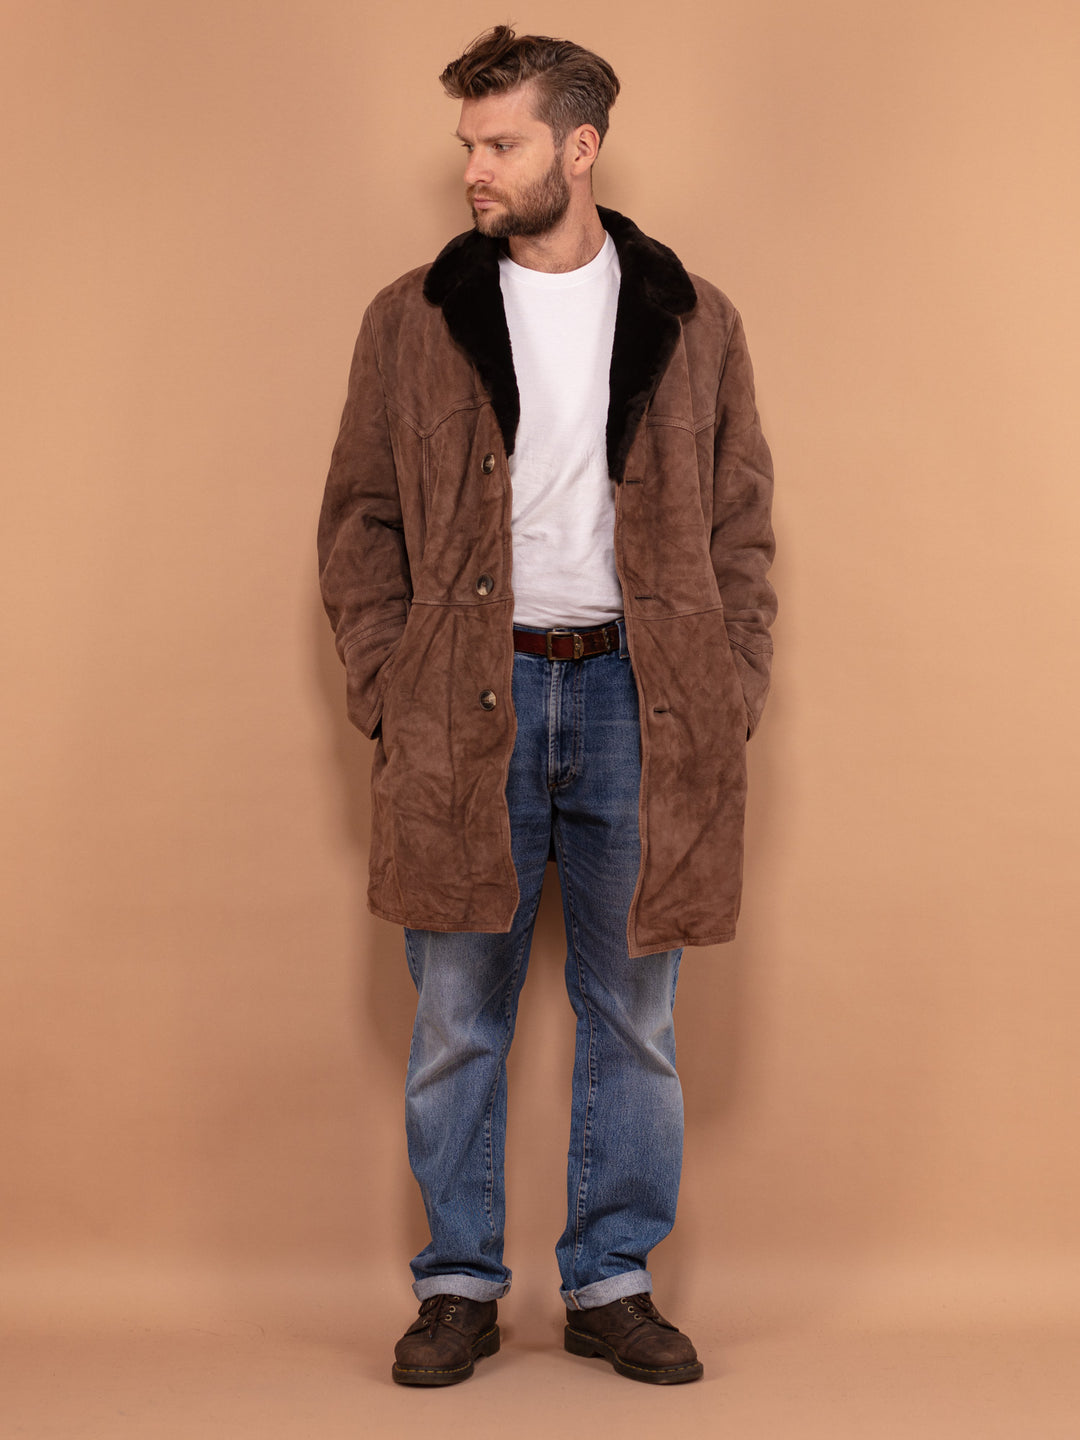 Men Classic Shearling Coat 70's, Size Large, Vintage Sheepskin Outerwear, Brown Suede Overcoat, Retro Winter Coat, Timeless Classic Coat